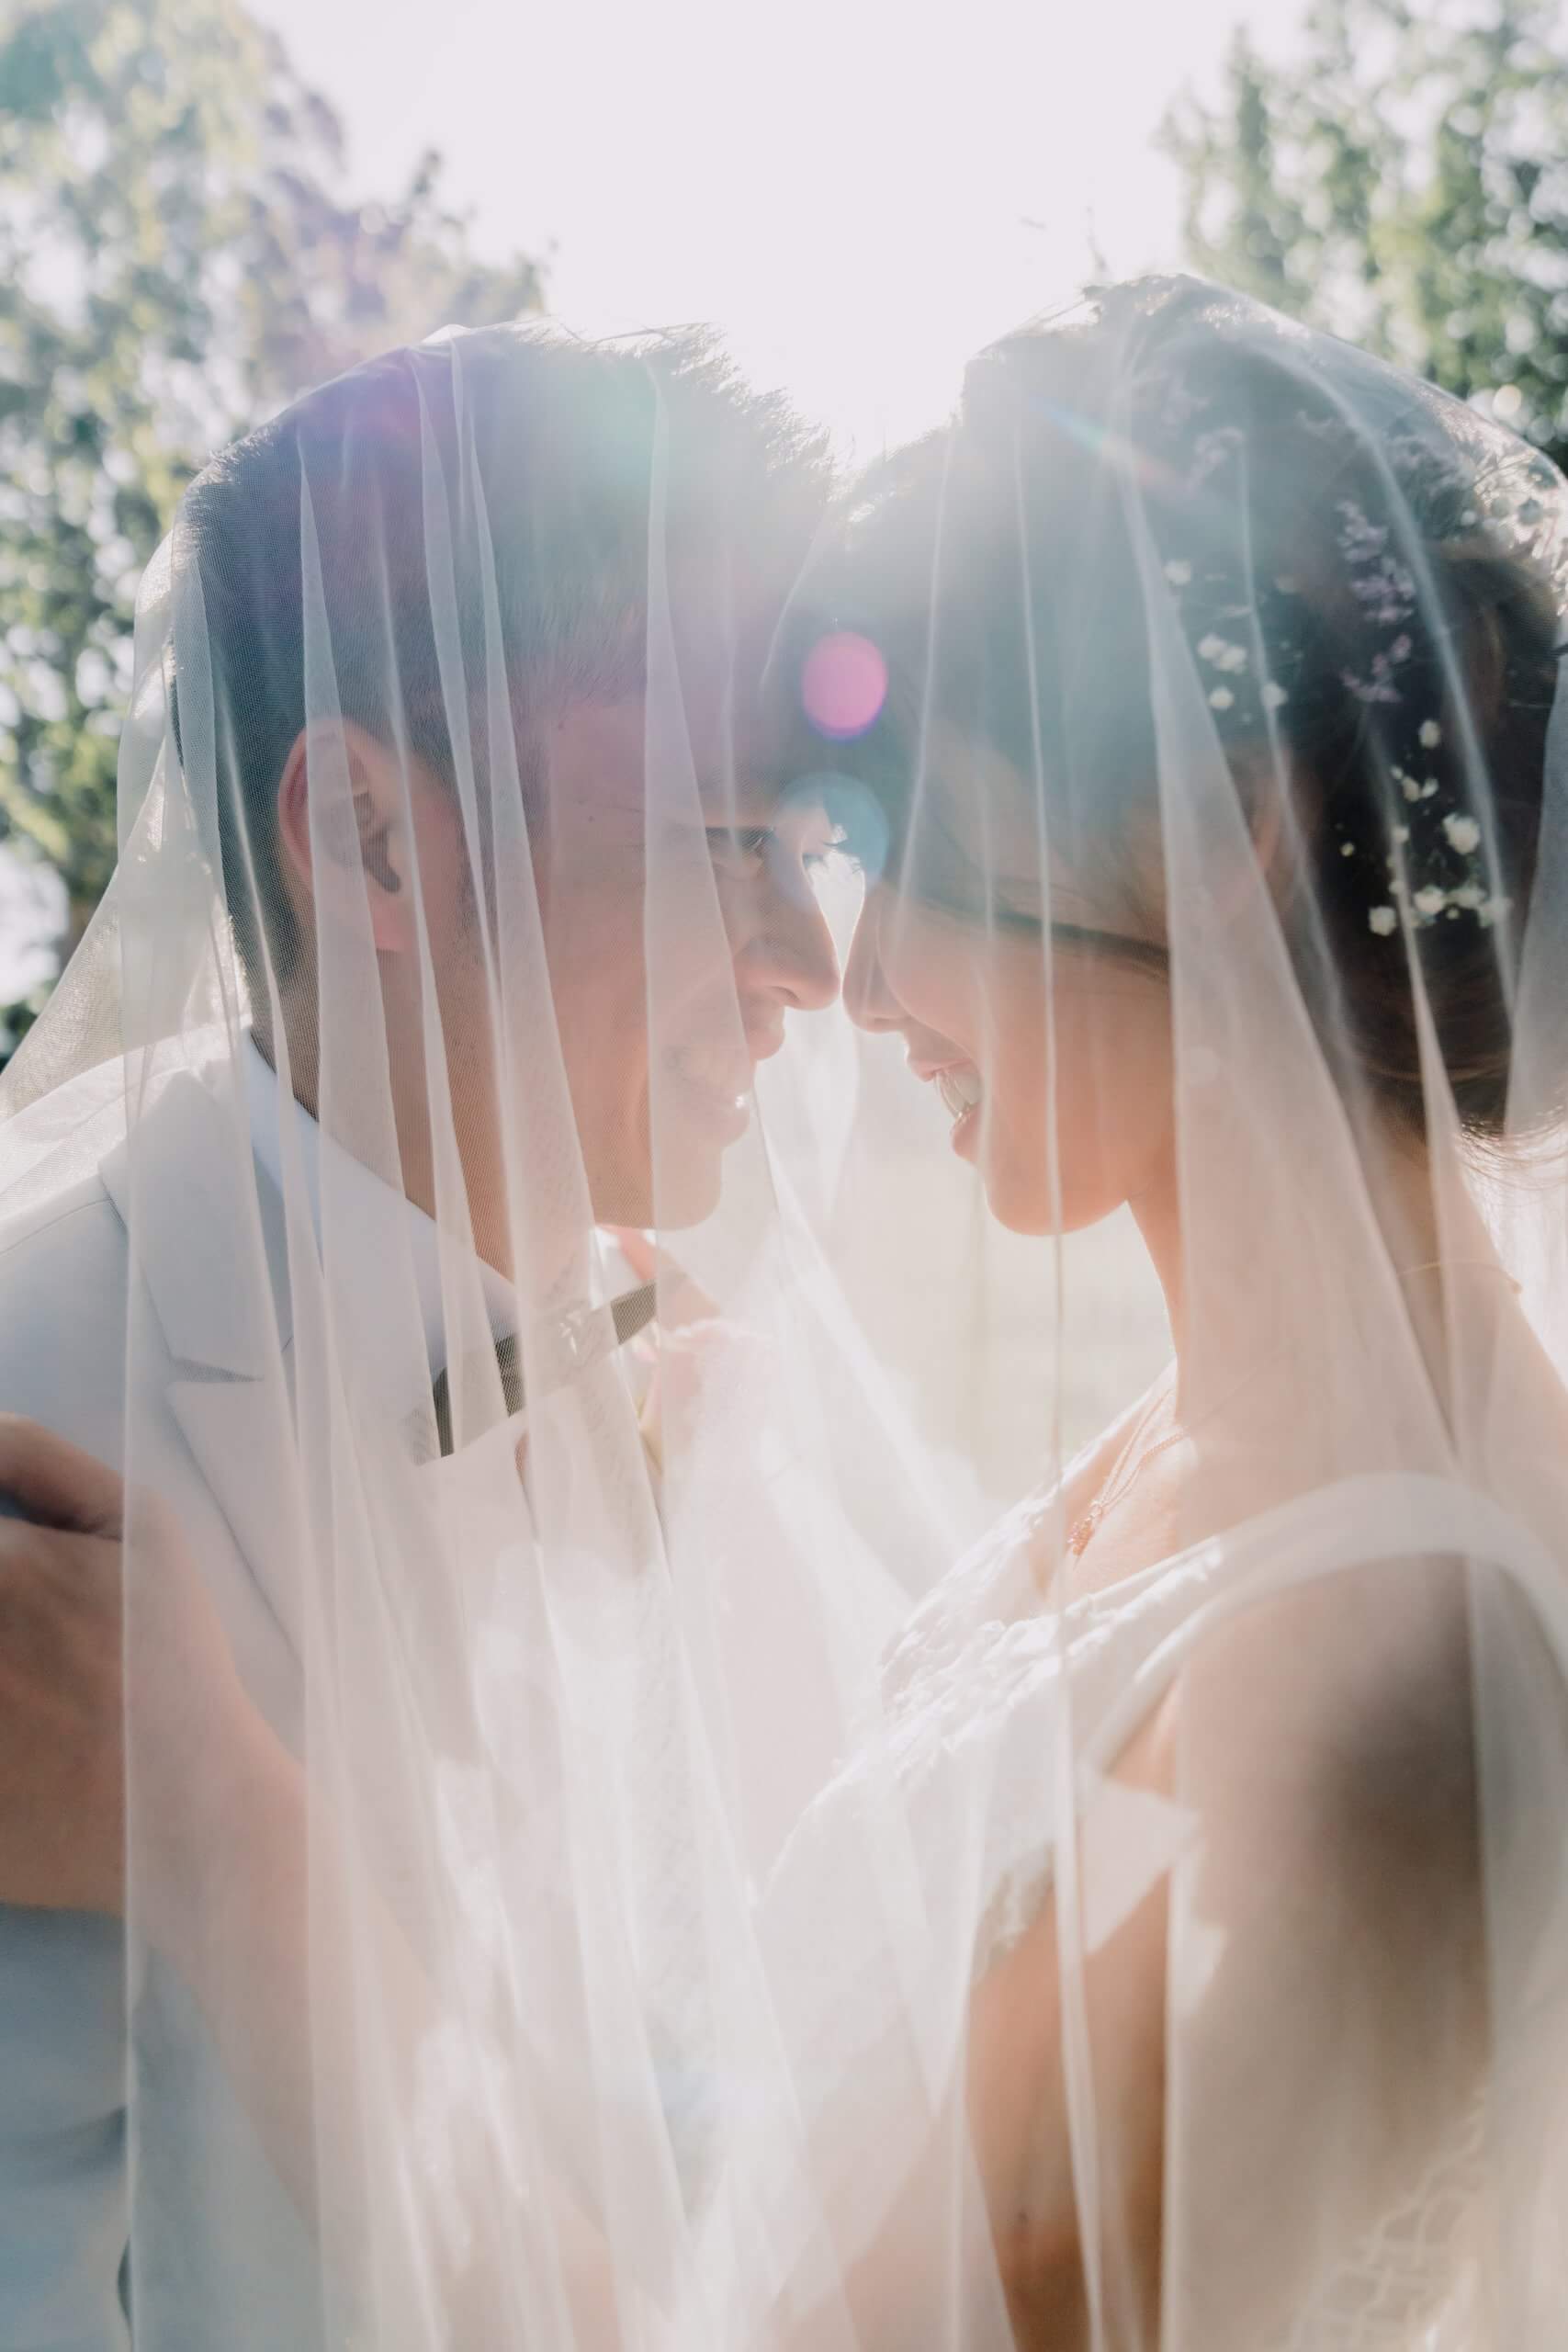 Narrative Portraiture - Bride and Groom under one veil and looking at each other